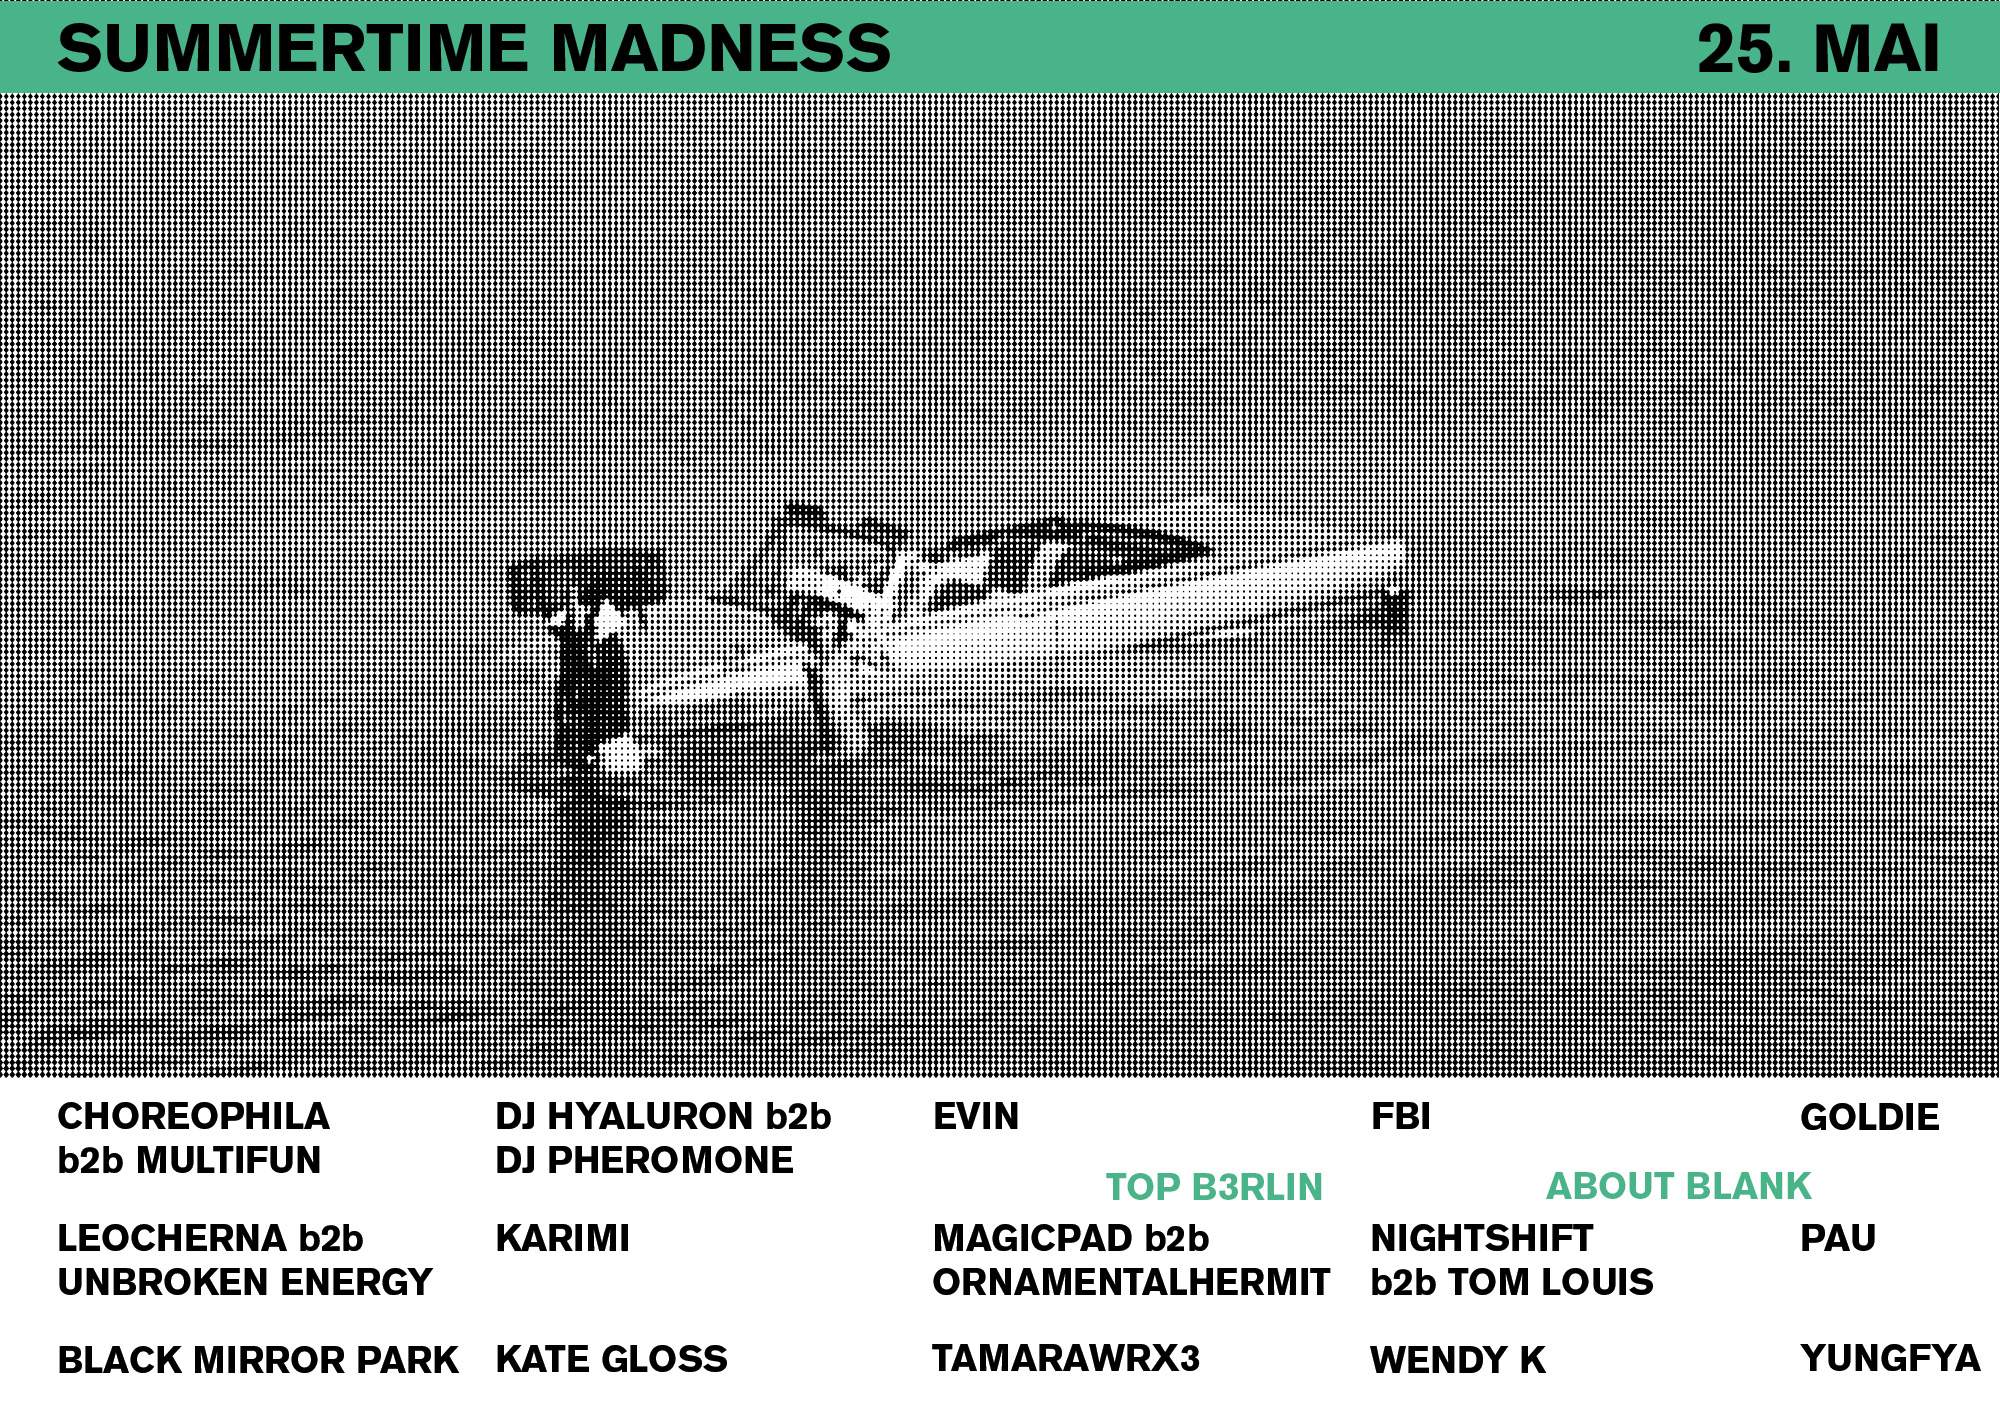 Summertime Madness with yungfya, evin, PAU & many more - フライヤー裏